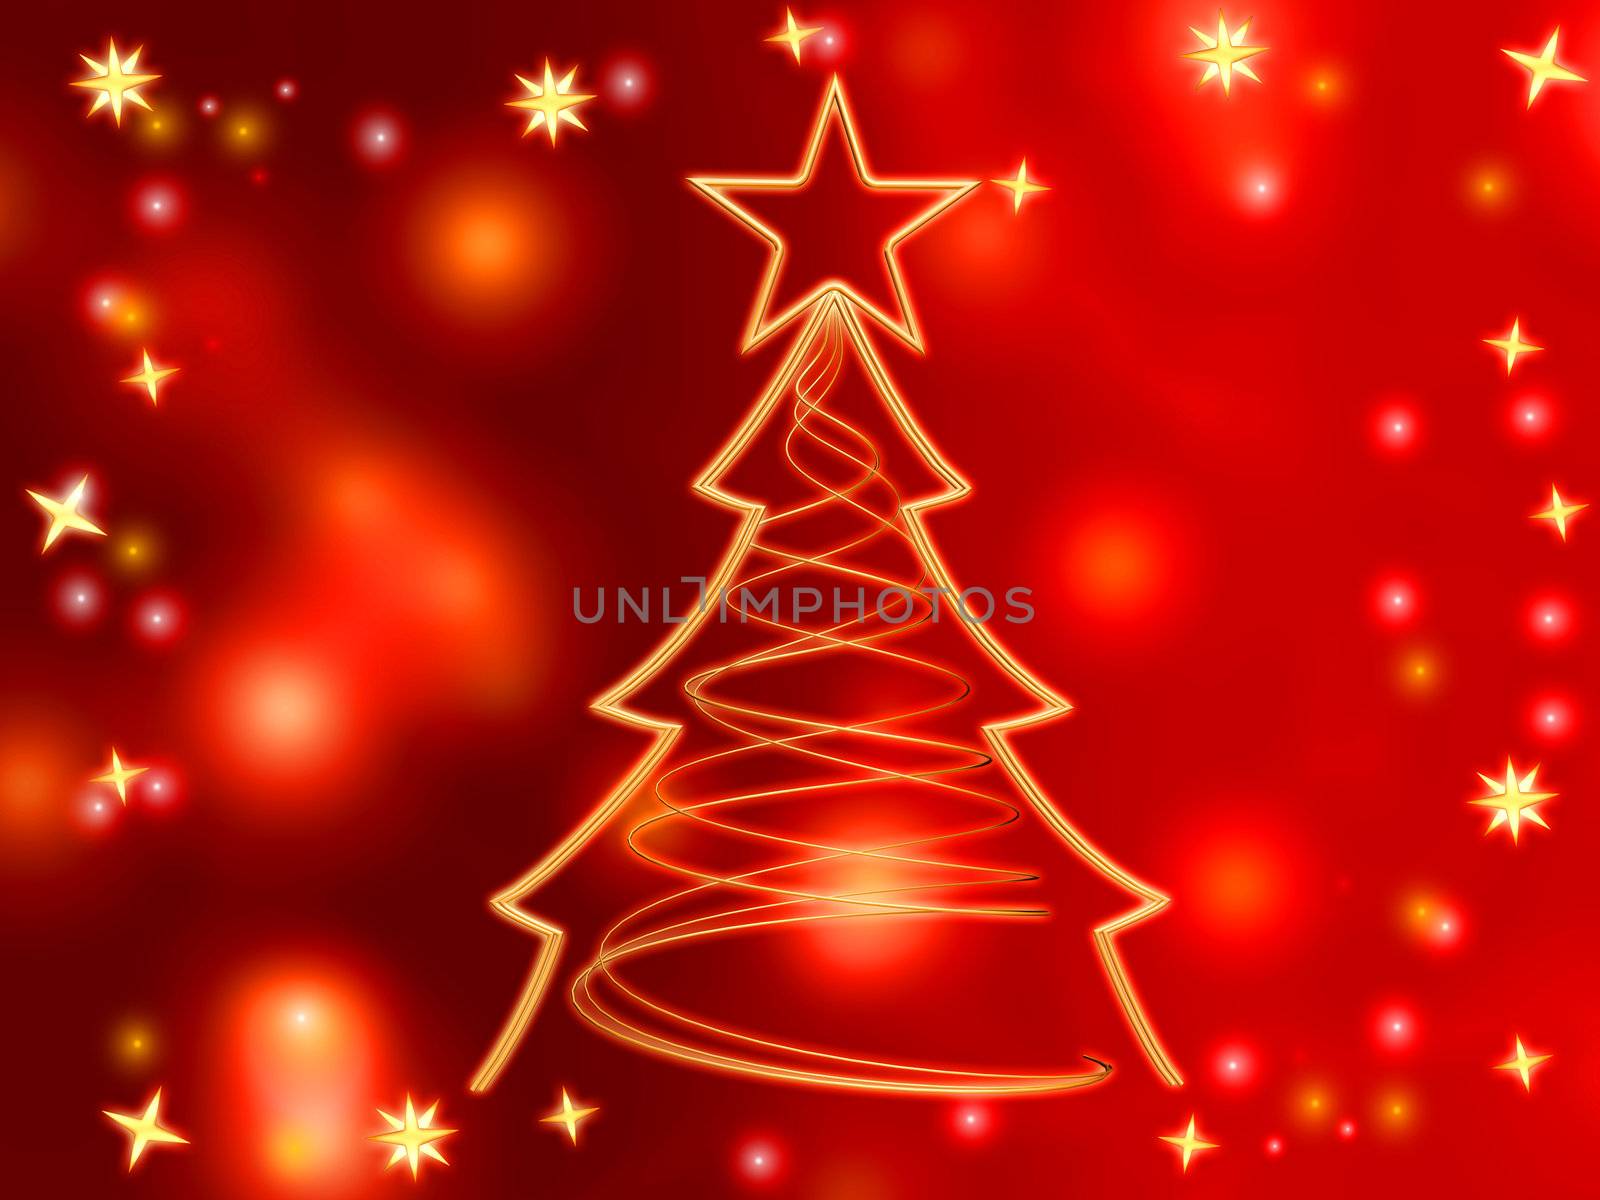 golden christmas tree with gold stars and lights over red background
